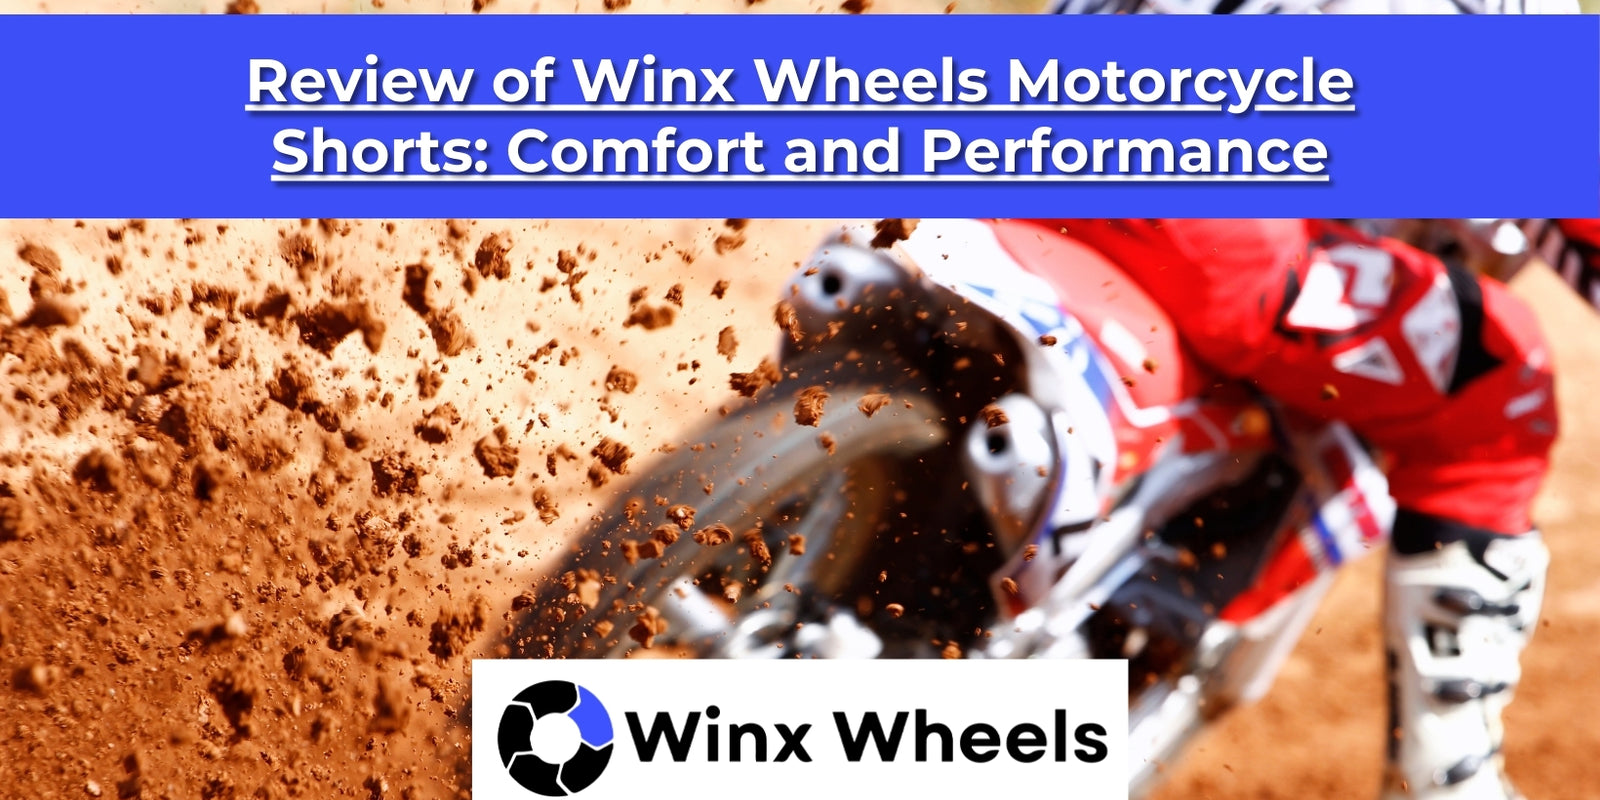 Review of Winx Wheels Motorcycle Shorts: Comfort and Performance